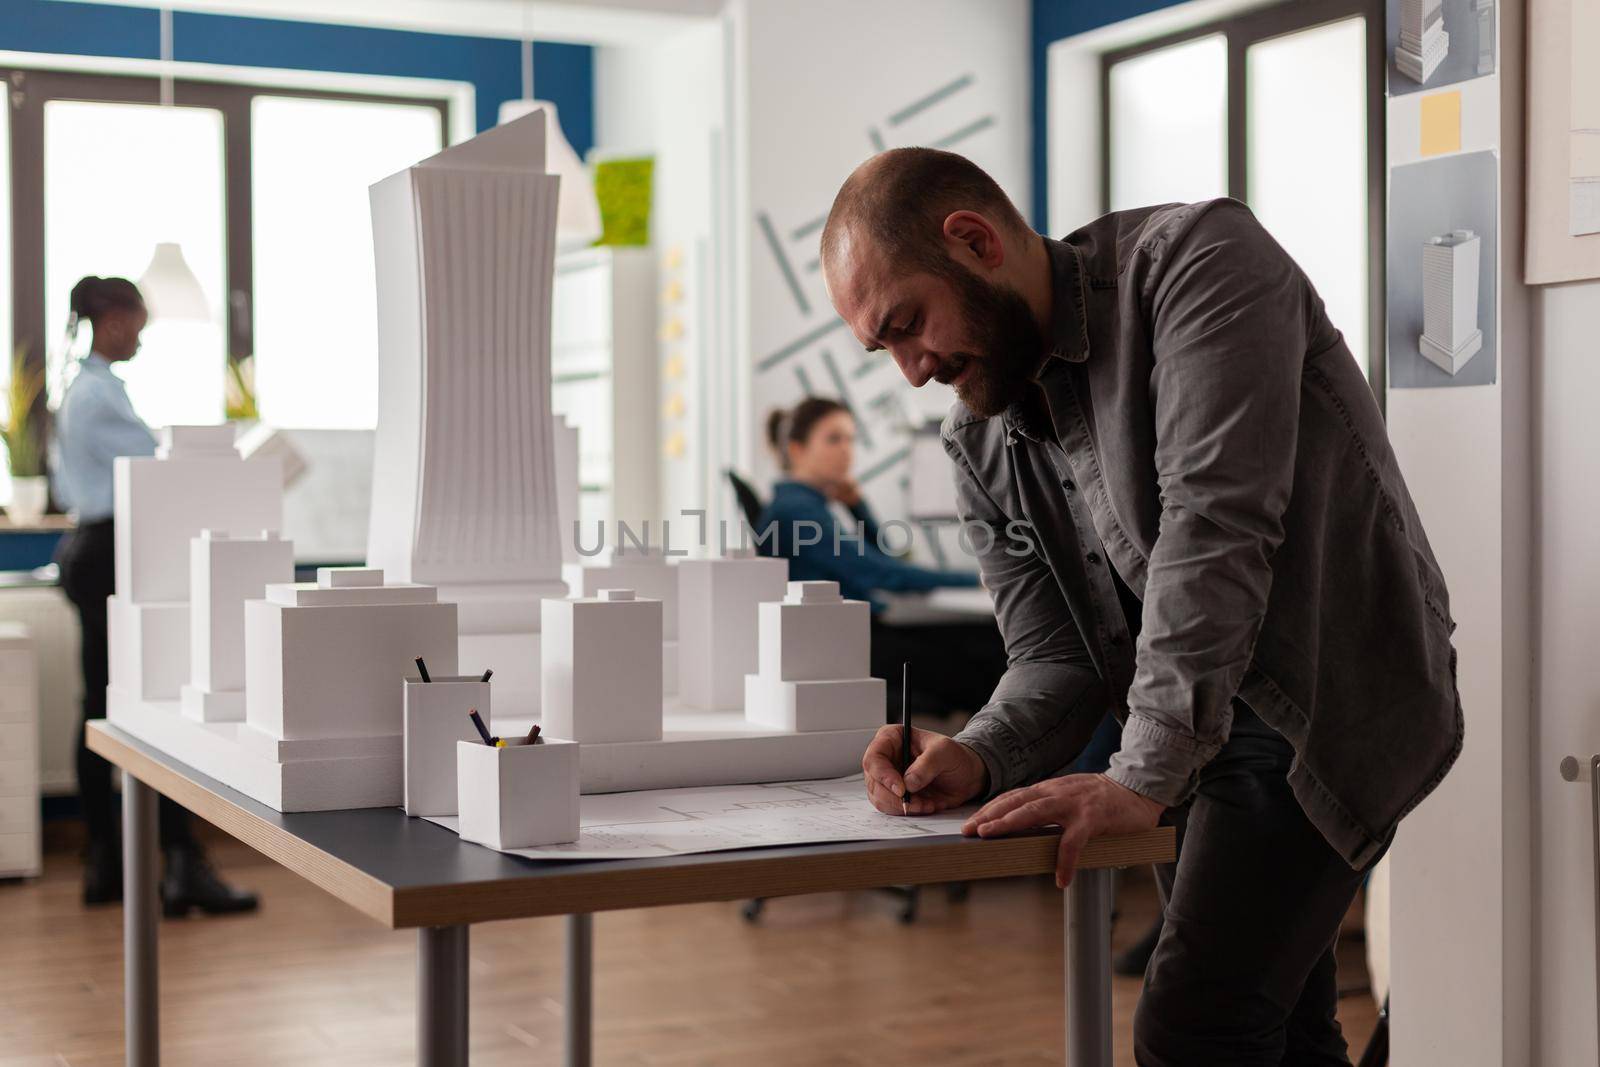 Architect drawing blueprints at desk in modern architectural office next to white foam scale model of skyscraper. Engineer making notes on construction plan leaning over desk.